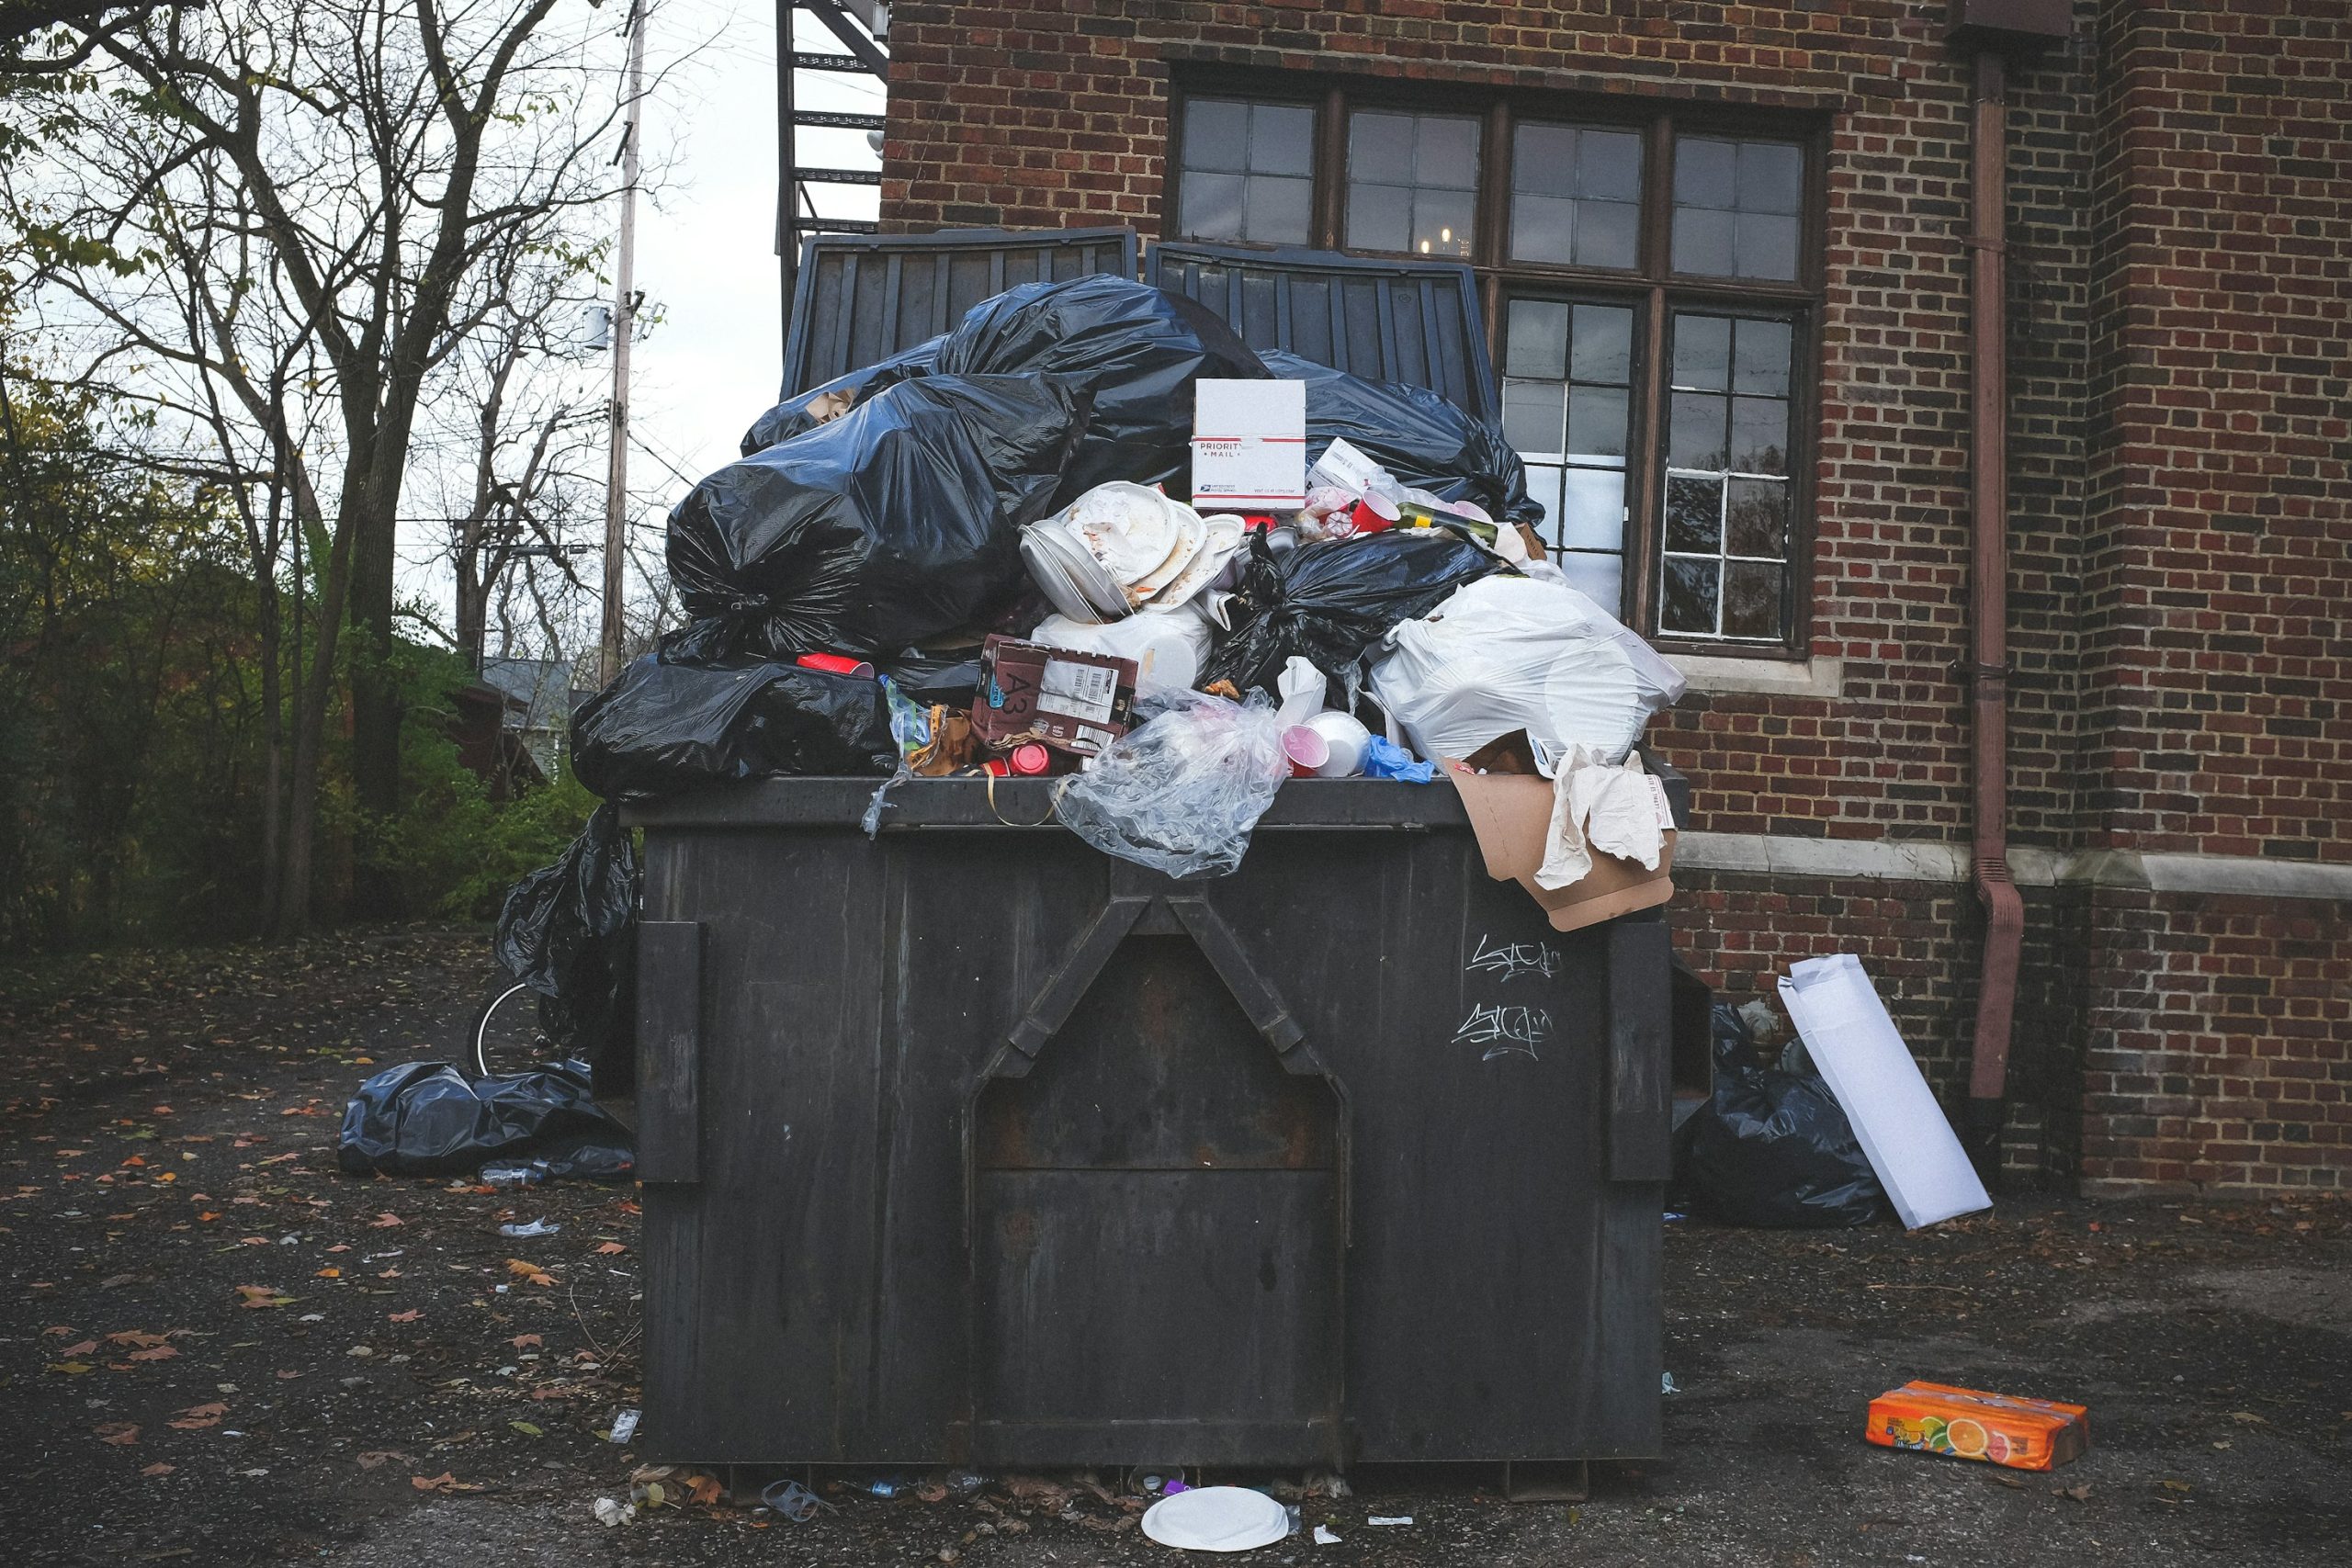 How to Find the Right Dumpster for Your Needs - weight restrictions, timeline, service, project, dumpster, dimensions, cost